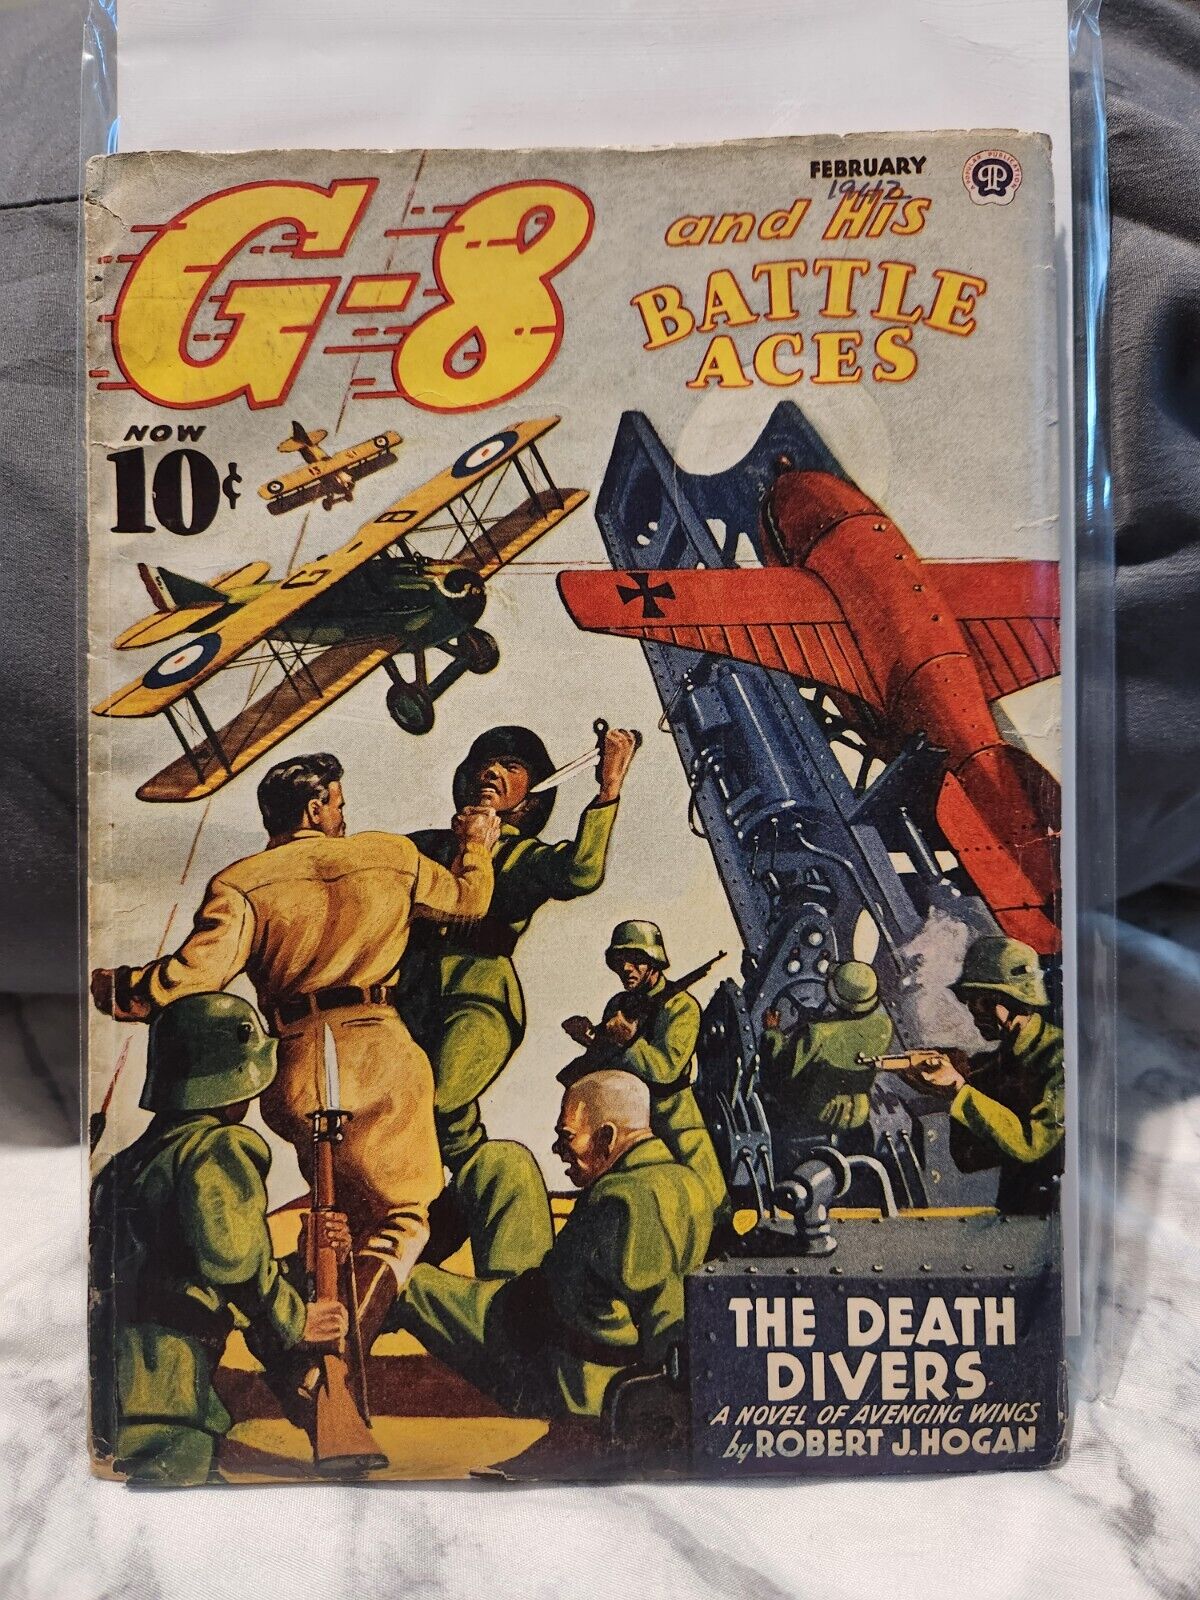 G-8 AND HIS BATTLE ACES PULP, FEBRUARY 1942. Malcolm Edwards Collection 